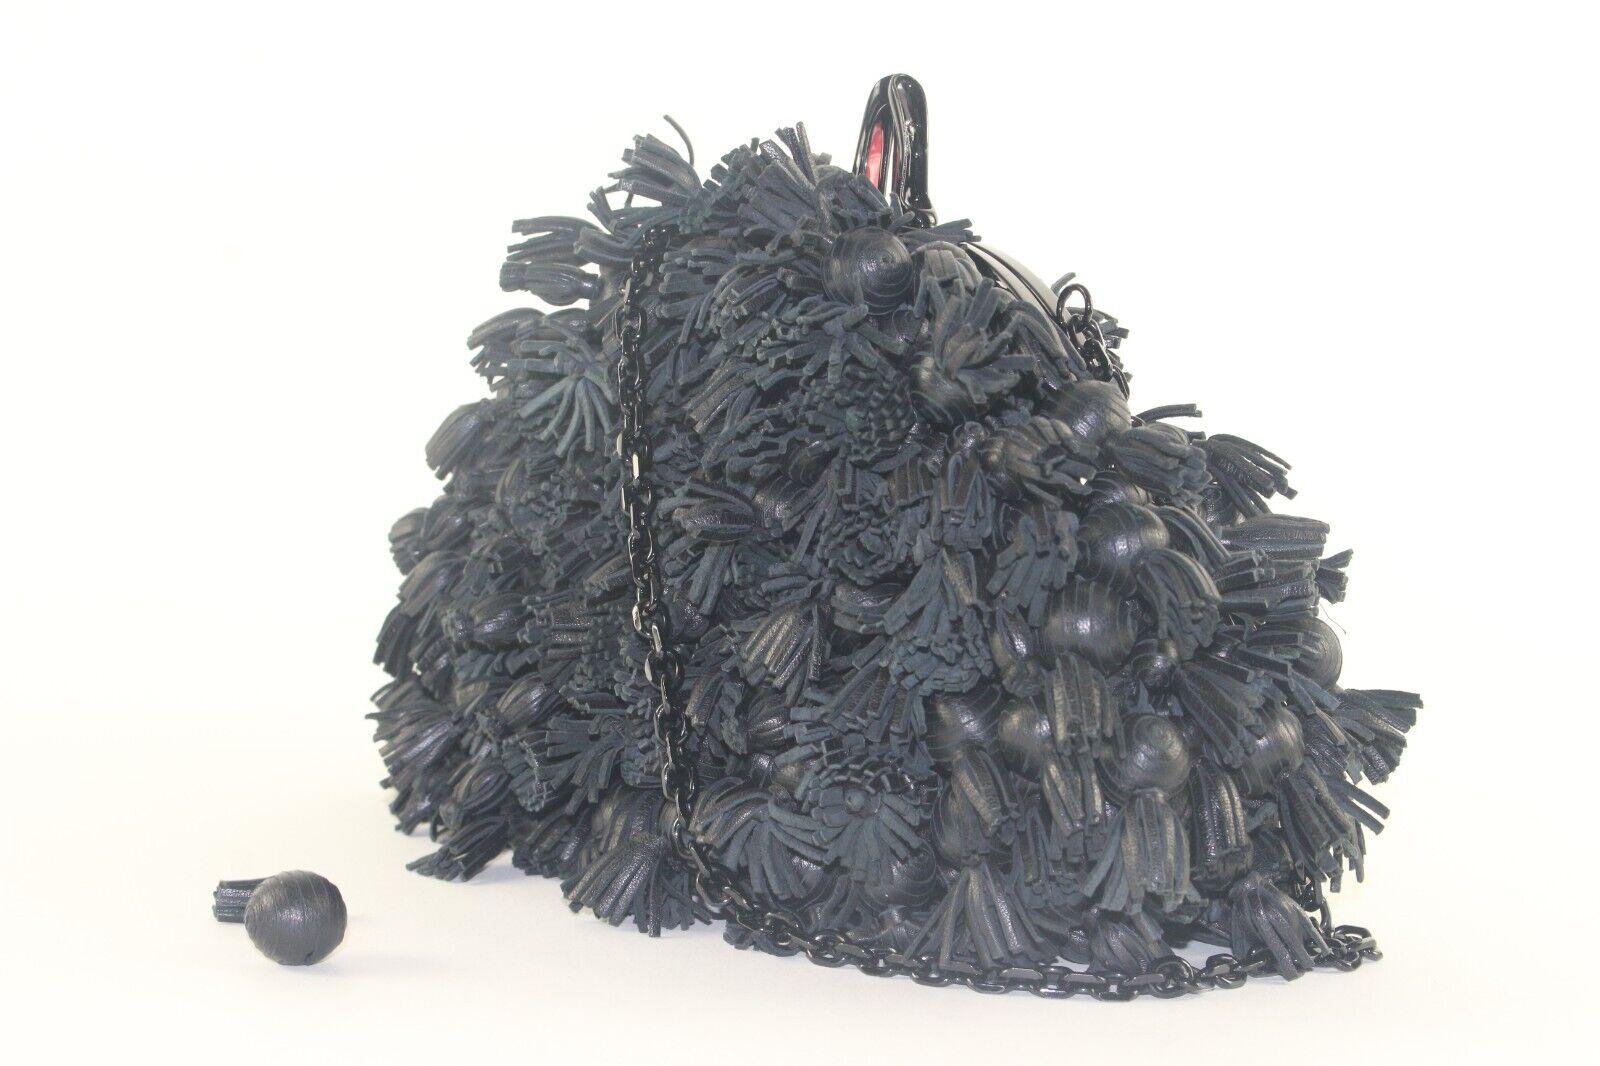 CHRISTIAN LOUBOUTIN Extremely Rare Fringe Knot Leather Bag 3CL1129K For Sale 7